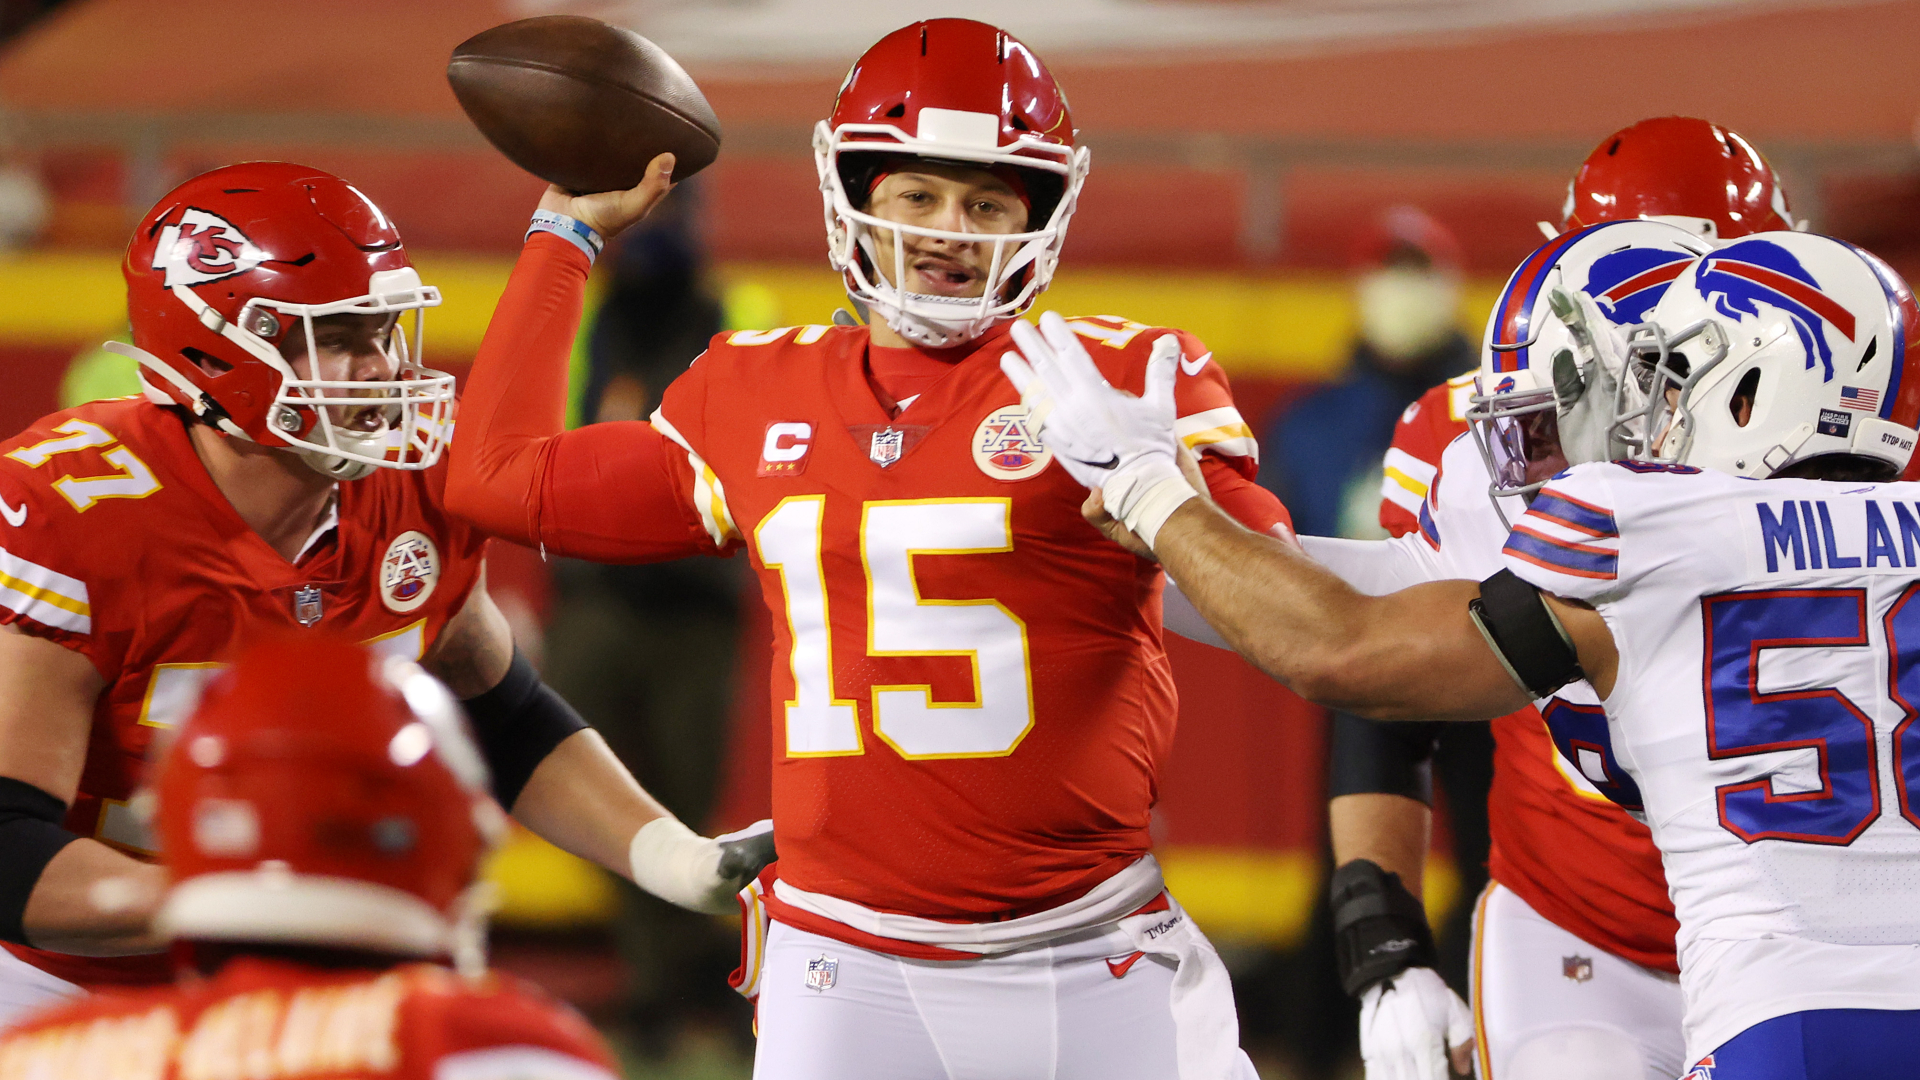 NFL Playoffs: Mahomes, Chiefs to face Brady's Buccaneers in Super Bowl LV